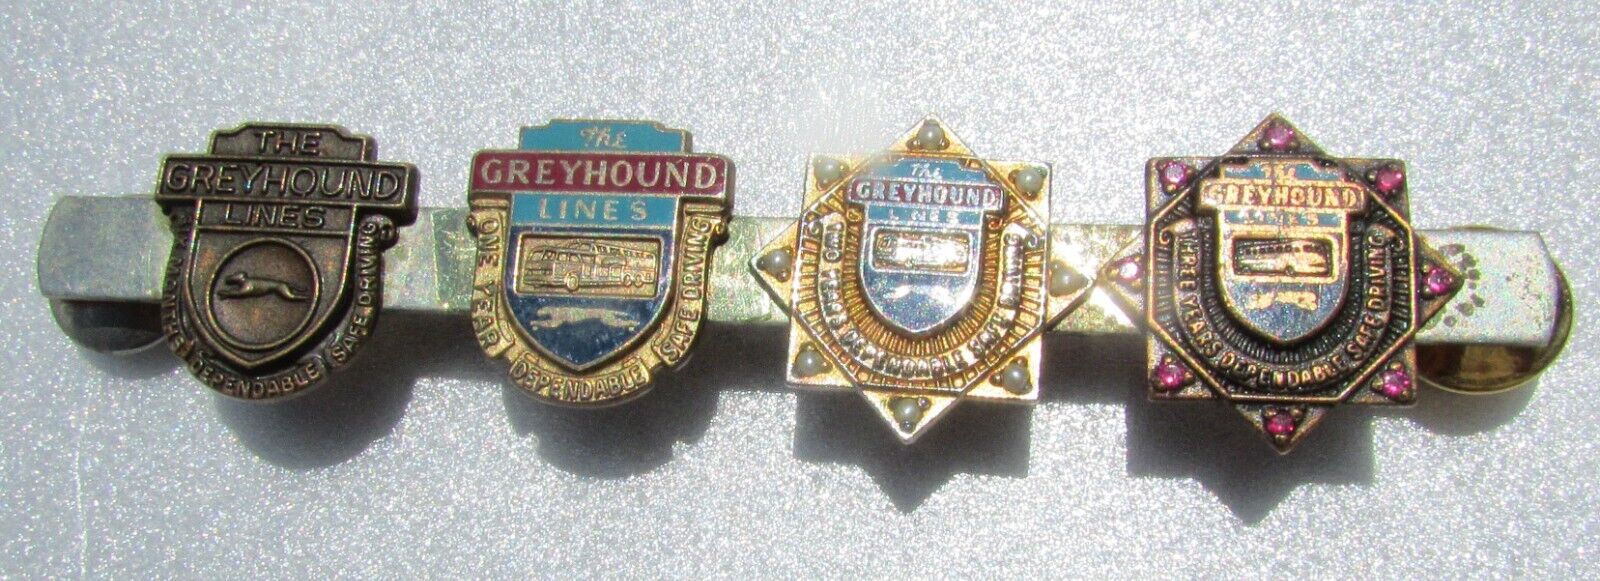 1950\'s Greyhound Bus Driver Service Awards pin 6 month-3 year seed pearls & ruby